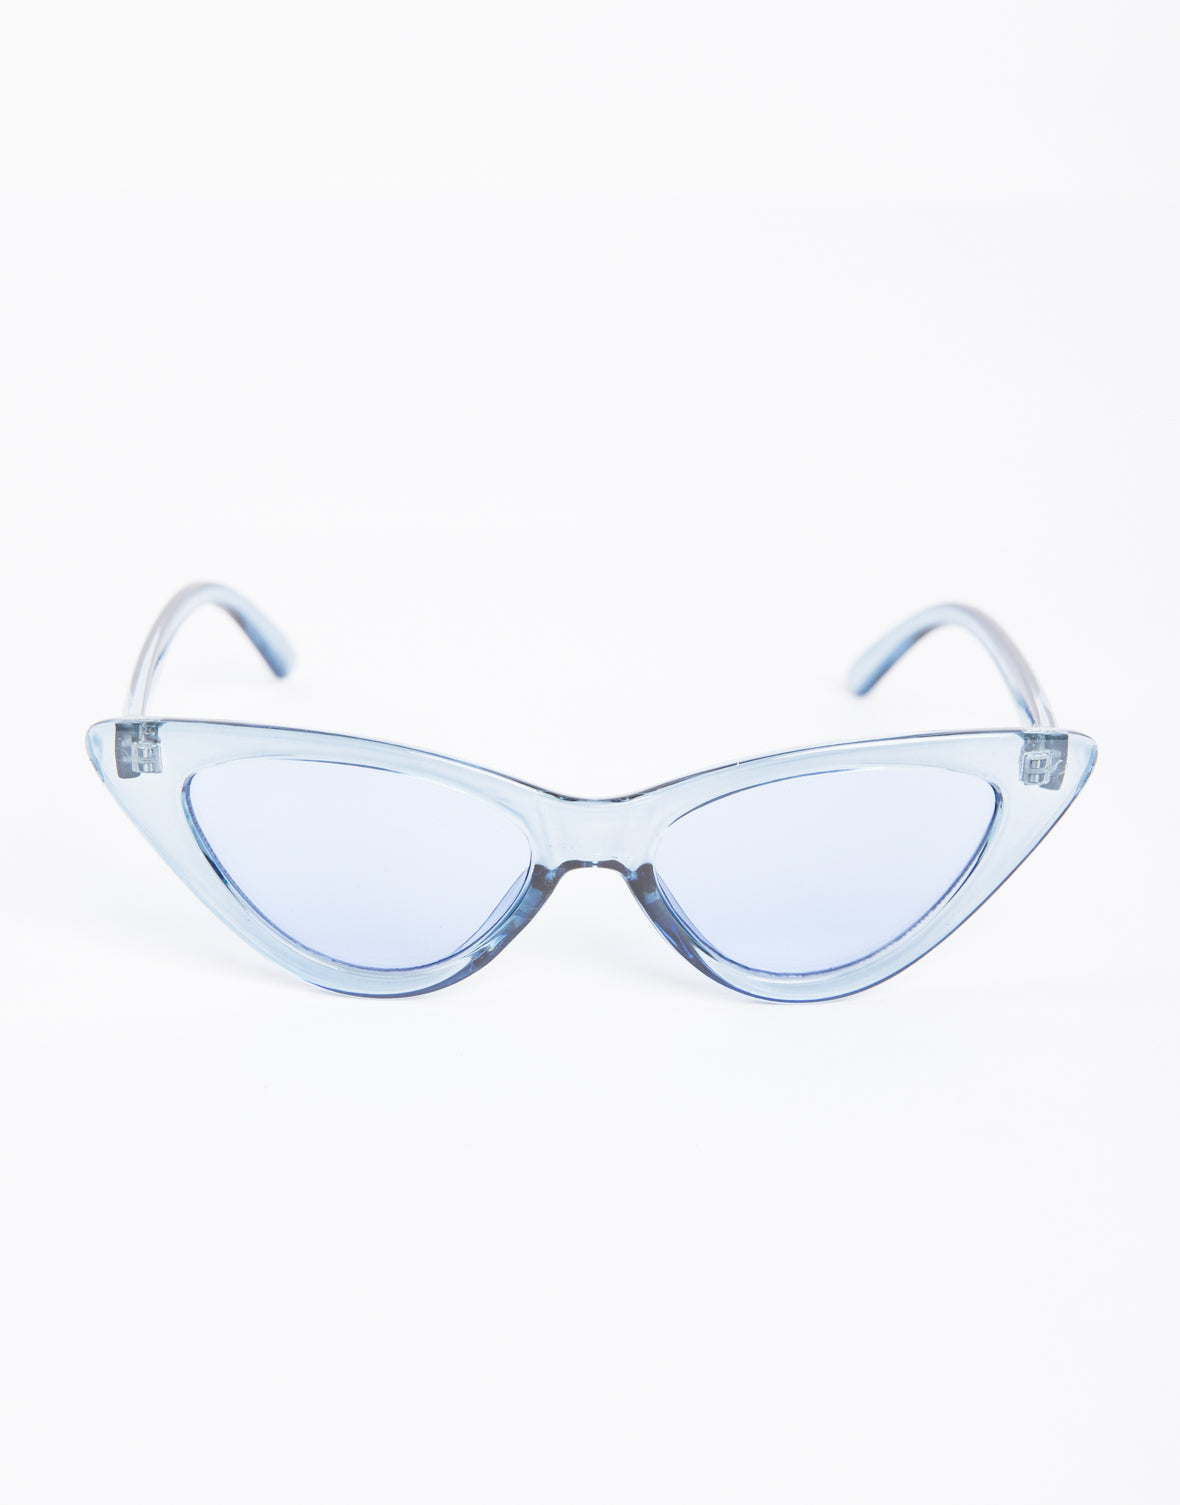 Clear Colored Cat Eye Sunglasses 2020ave 